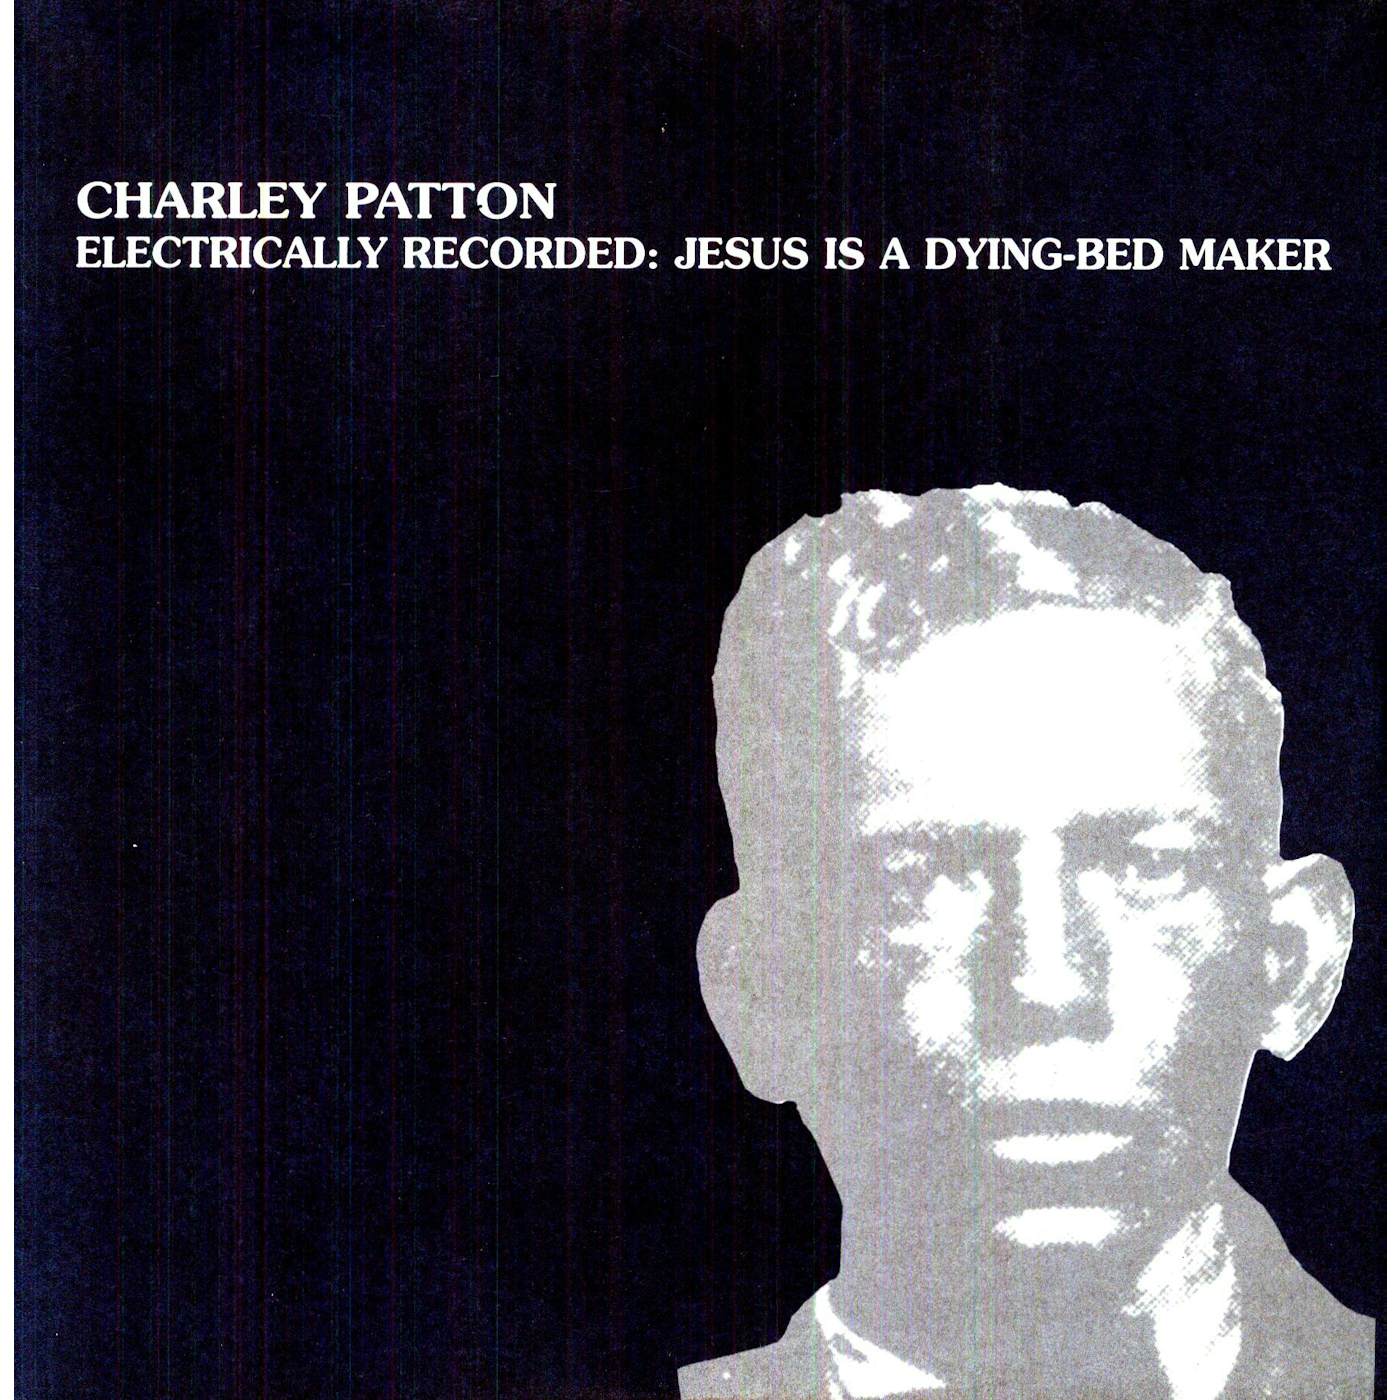 Charley Patton ELECTRICALLY RECORDED-JESUS IS A DYING-BED MAKER Vinyl Record